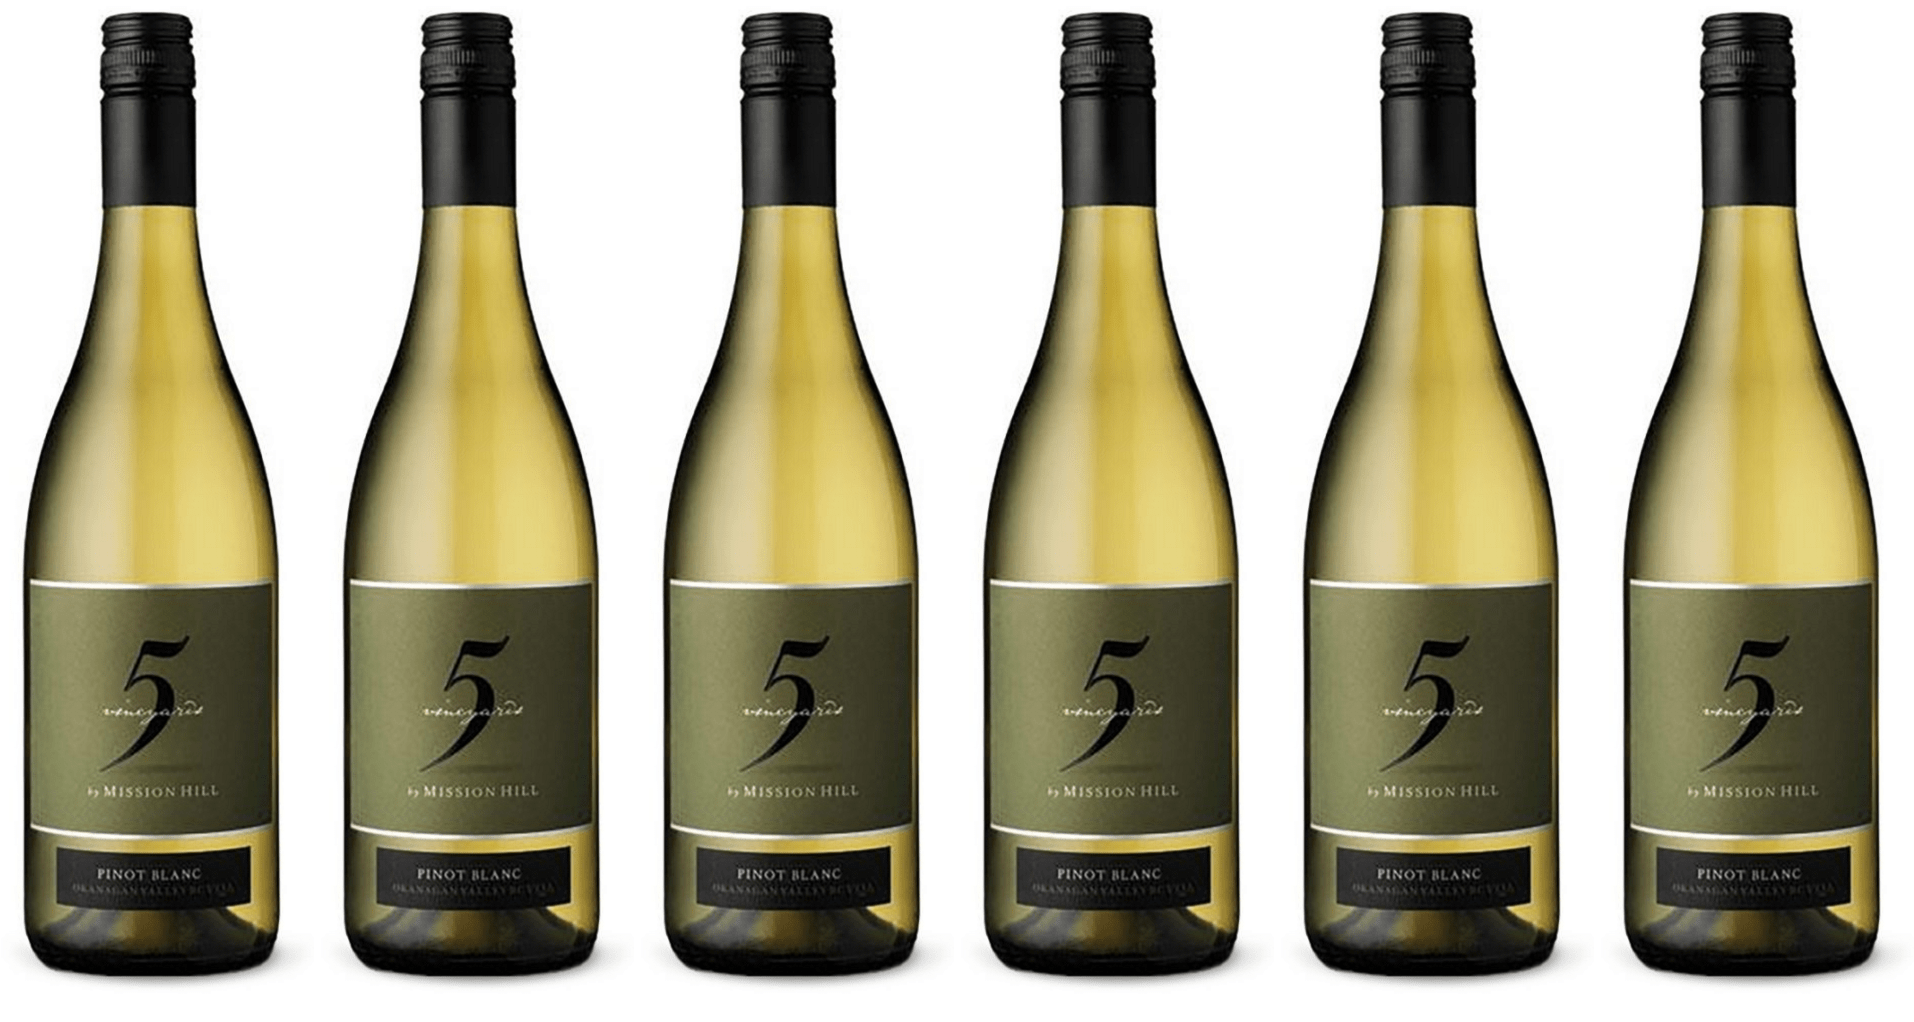 Try This : Mission Hill Pinot Blanc